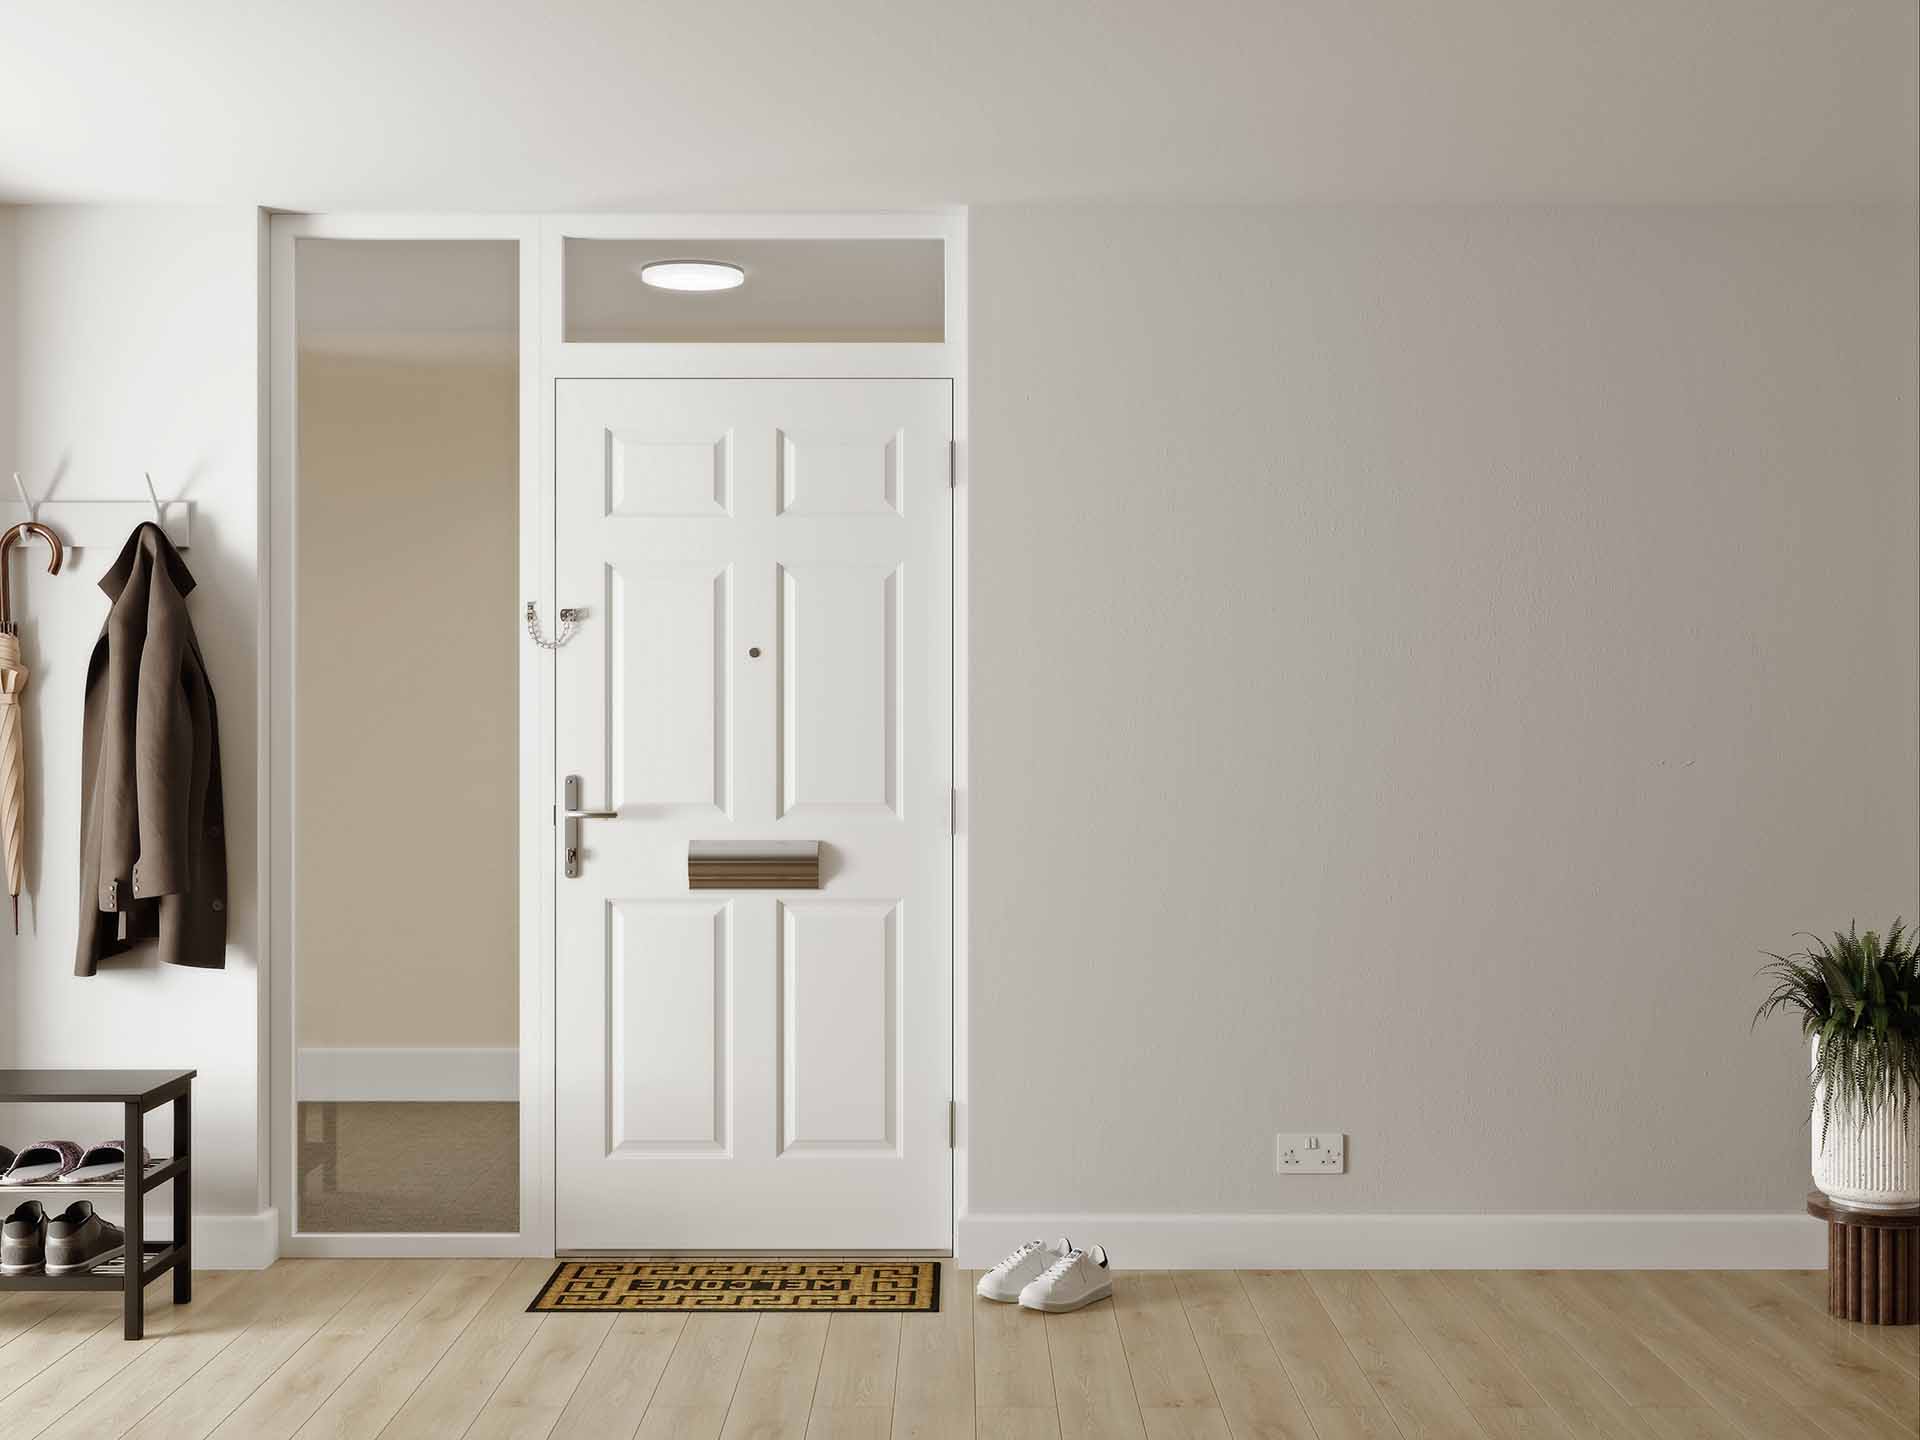 Choosing a secure flat entrance doorset to protect your residents